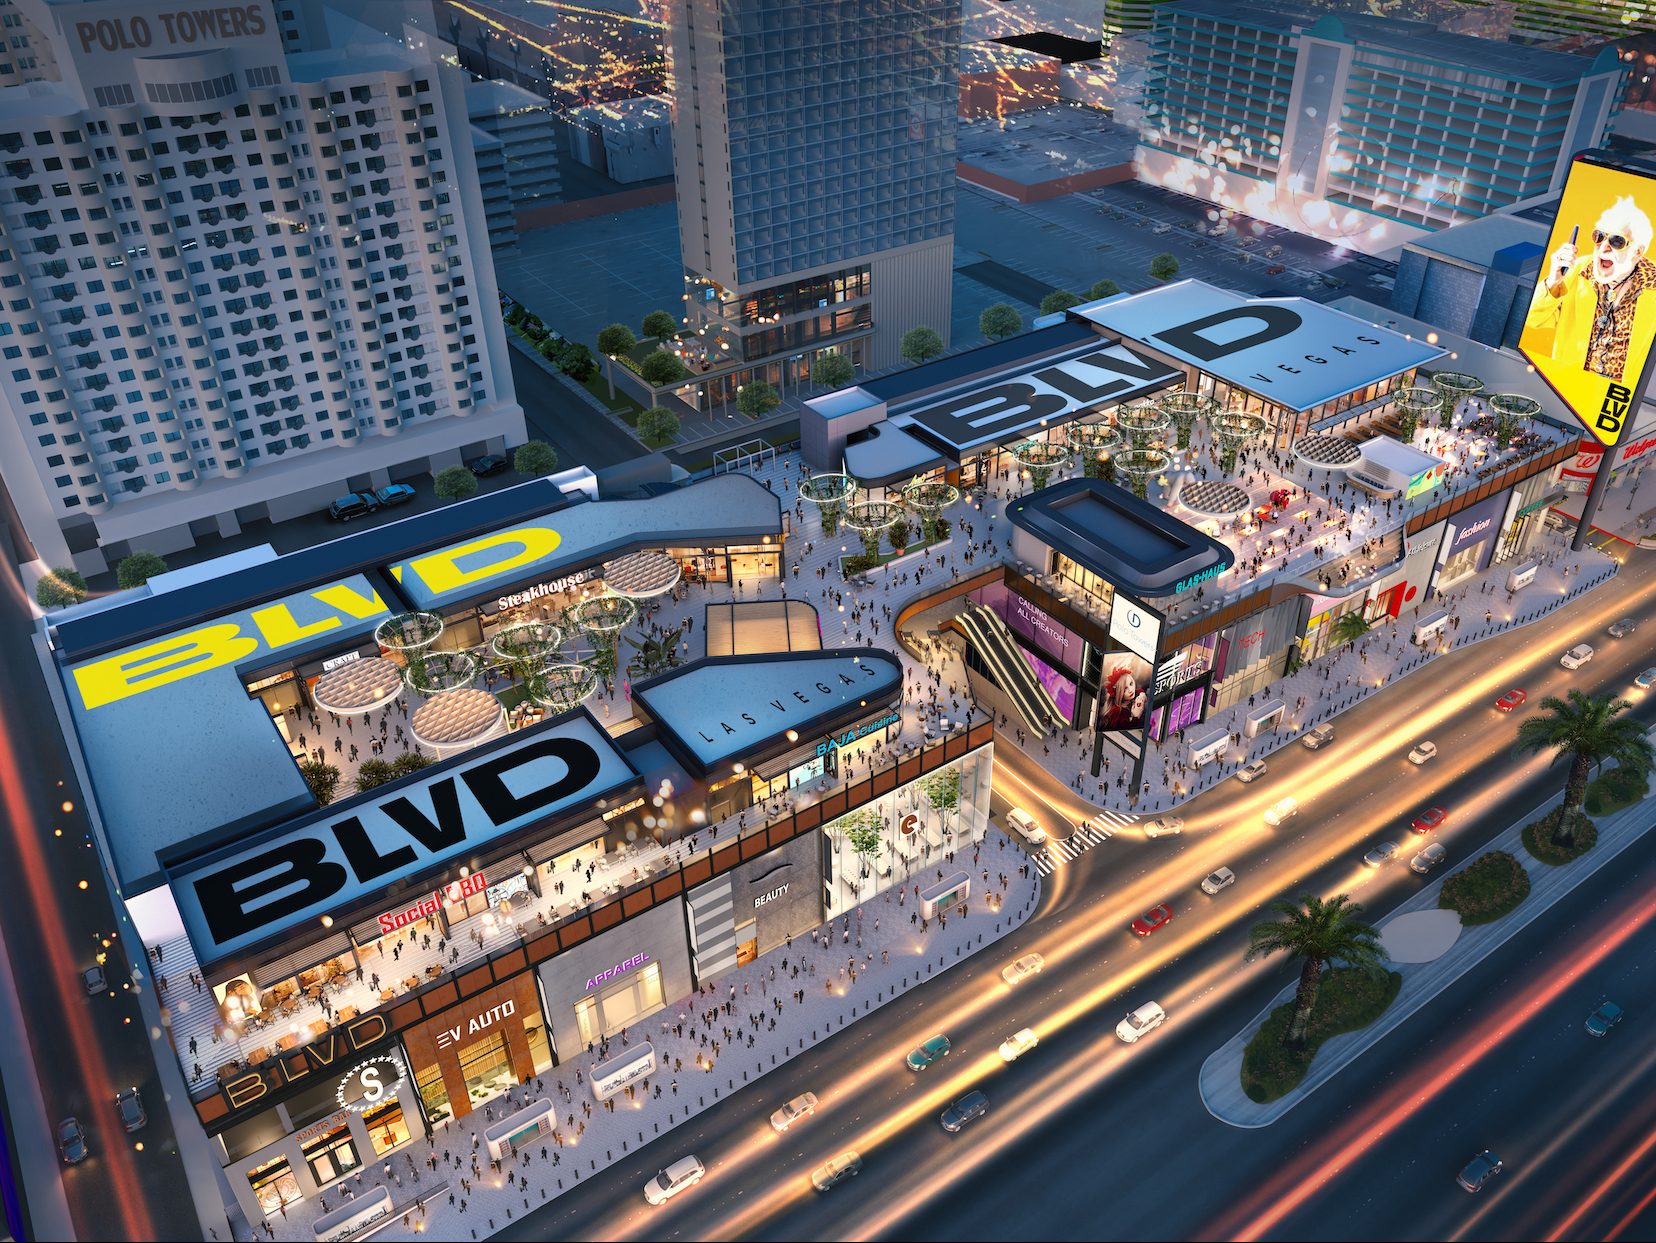 New shopping center site in downtown Las Vegas approved by city